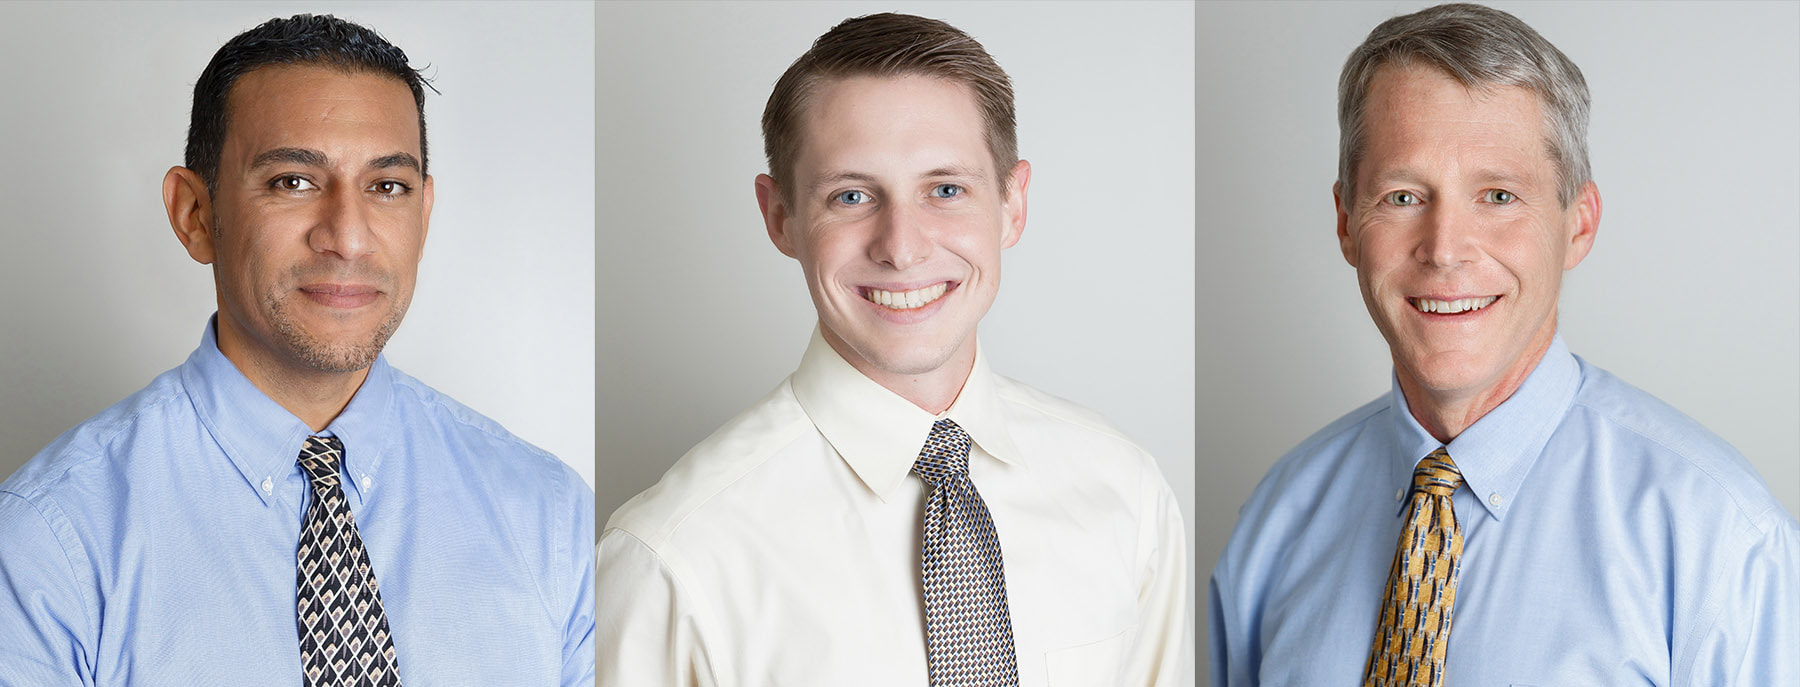 headshot photos of three business managers in business casual attire